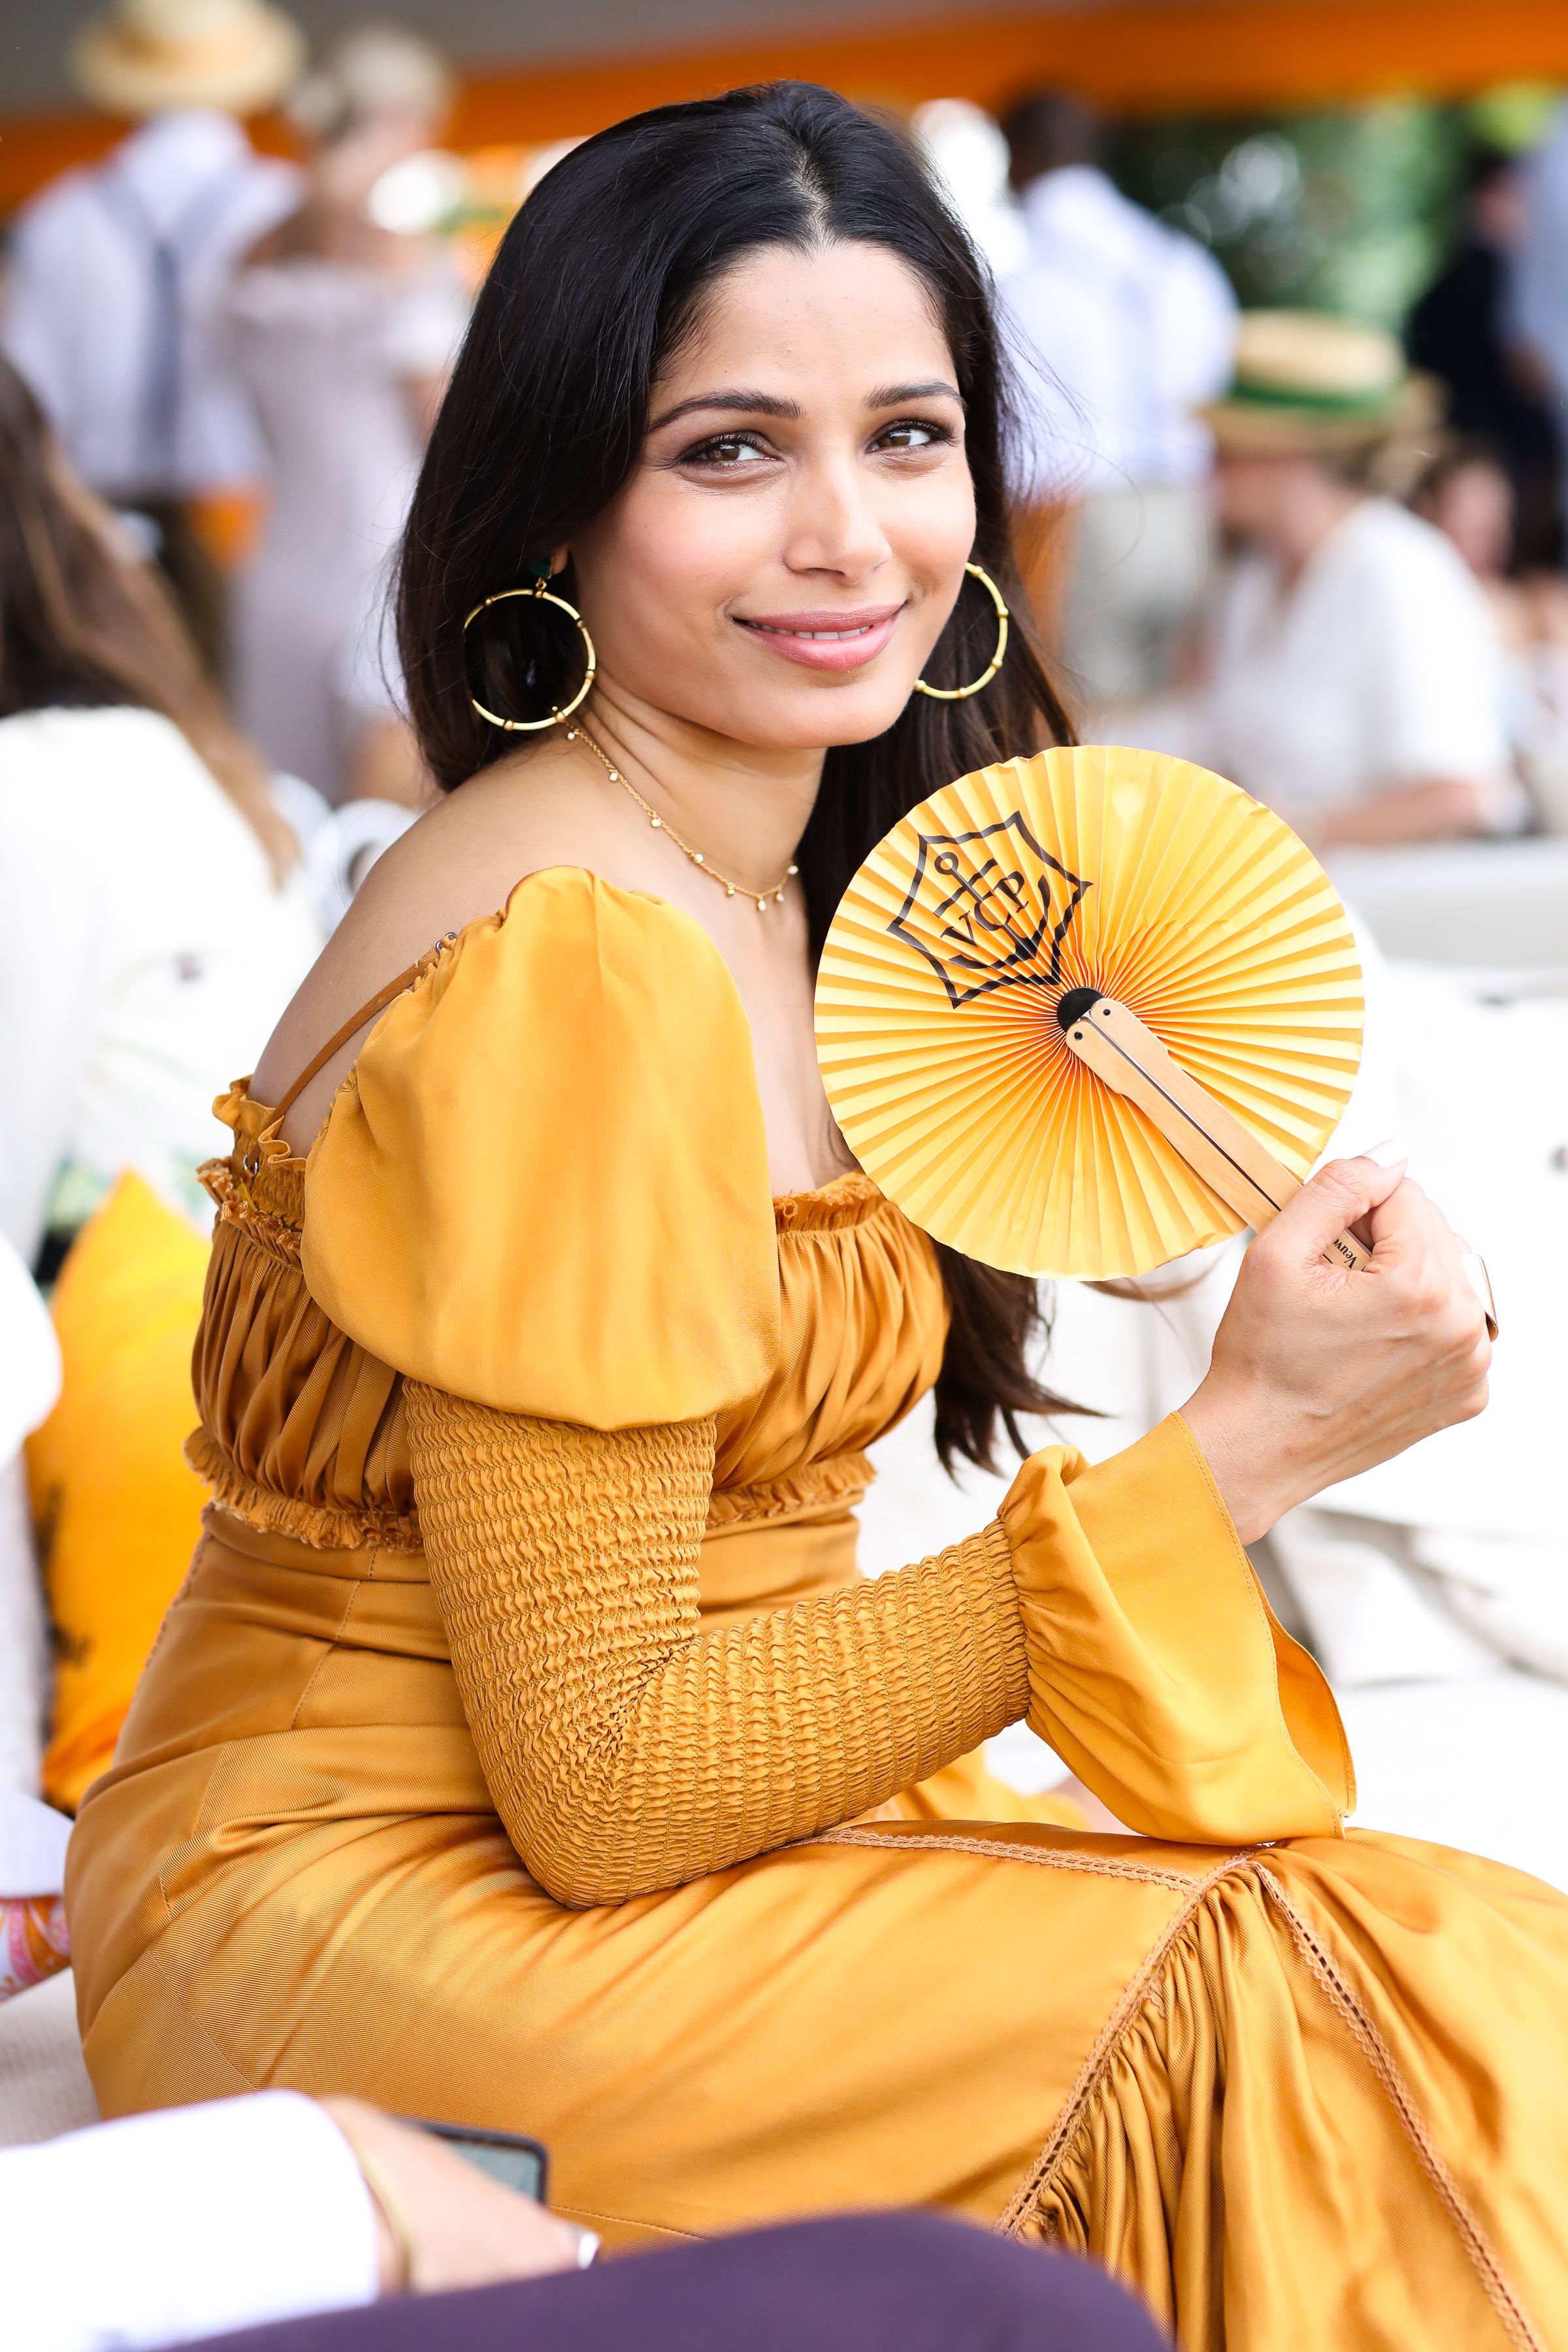 Veuve Clicquot Polo Classic 2018 - BLONDIE IN THE CITY